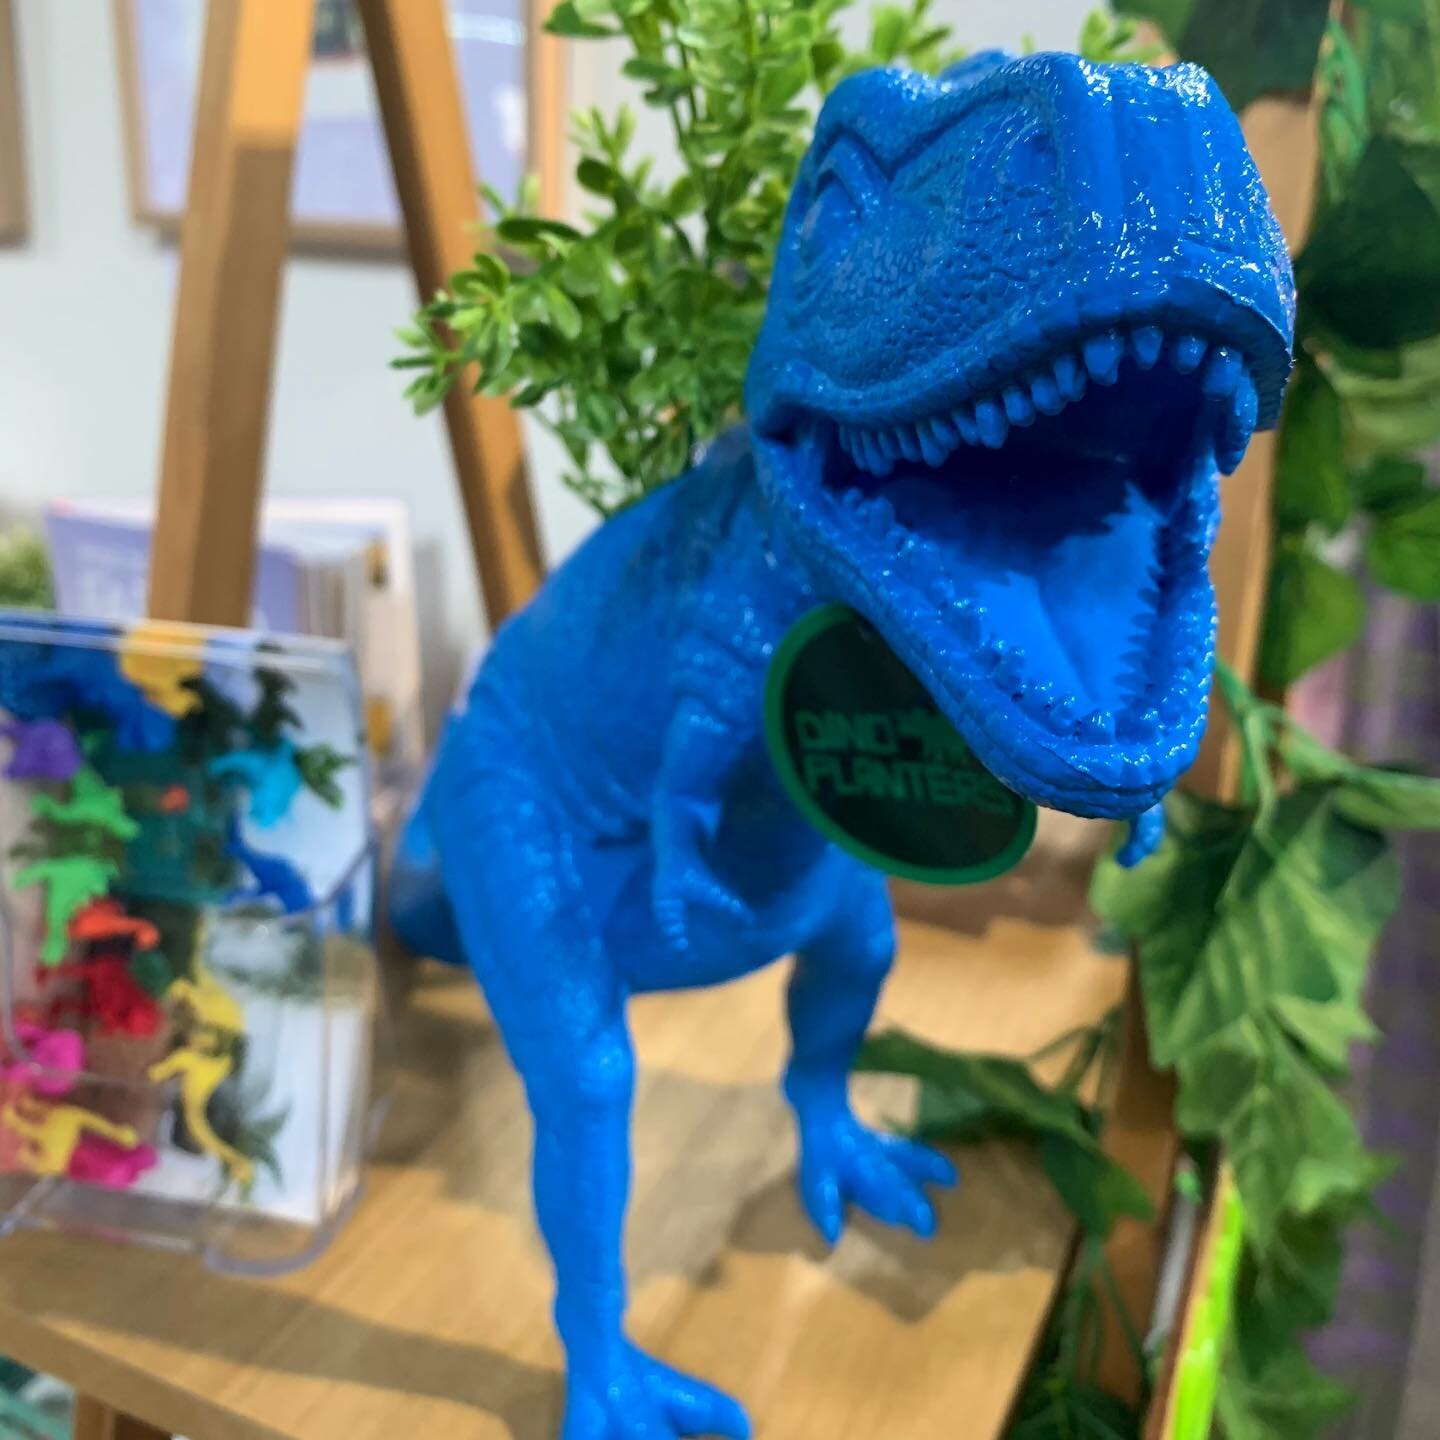 ROARING into the weekend! Hope your Saturday was fabulous.

Available @anna.andco.homewares in the @little_birdy_uralla hangar! 🦖🌟

#dinoplanter #dinoplanters #dinosaur #dinosaurs #dinosaursofinstagram #dinosaursarecool #dinosaurplanter #dinosaurpl